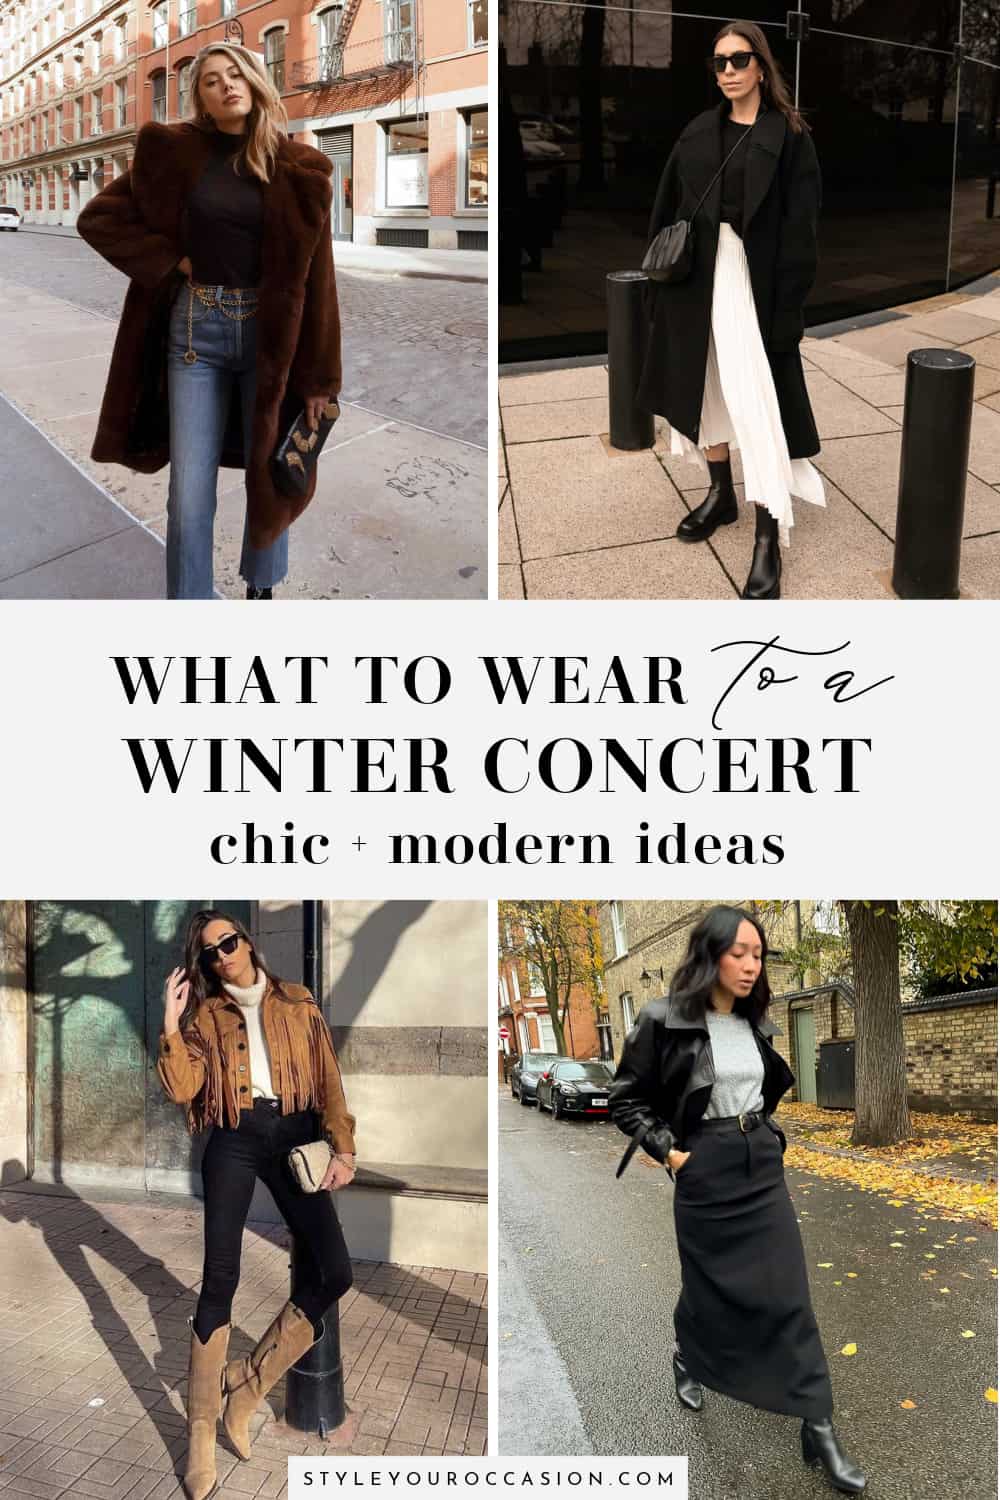 11+ Chic Winter Concert Outfits That Just Make Sense